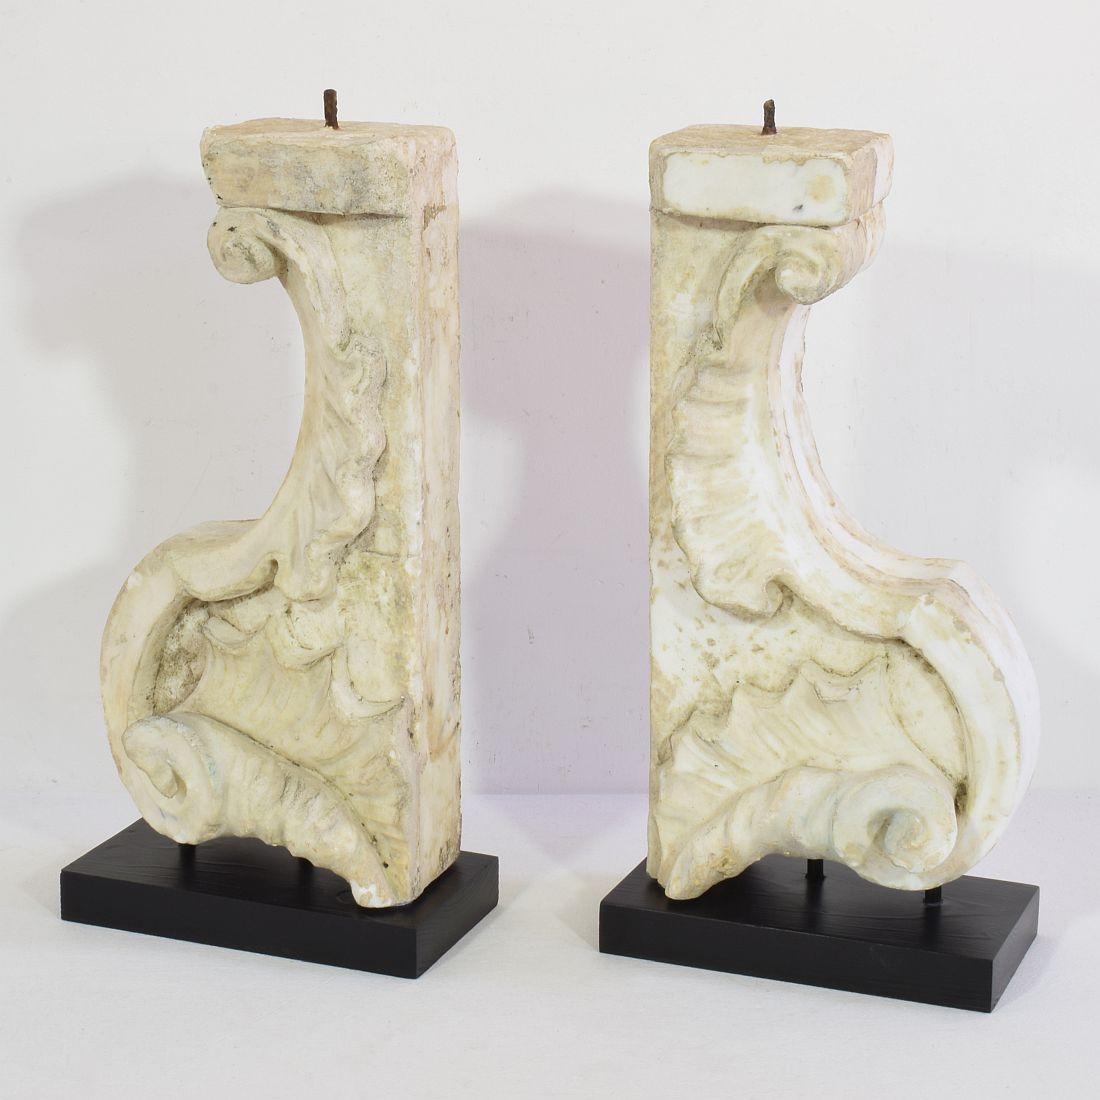 Unique and very beautiful pair weathered white marble baroque ornaments. They most likely once adorned a church altar.
Original period pieces, Italy, circa 1650-1750. Weathered and small losses. 
Measurement is individual.